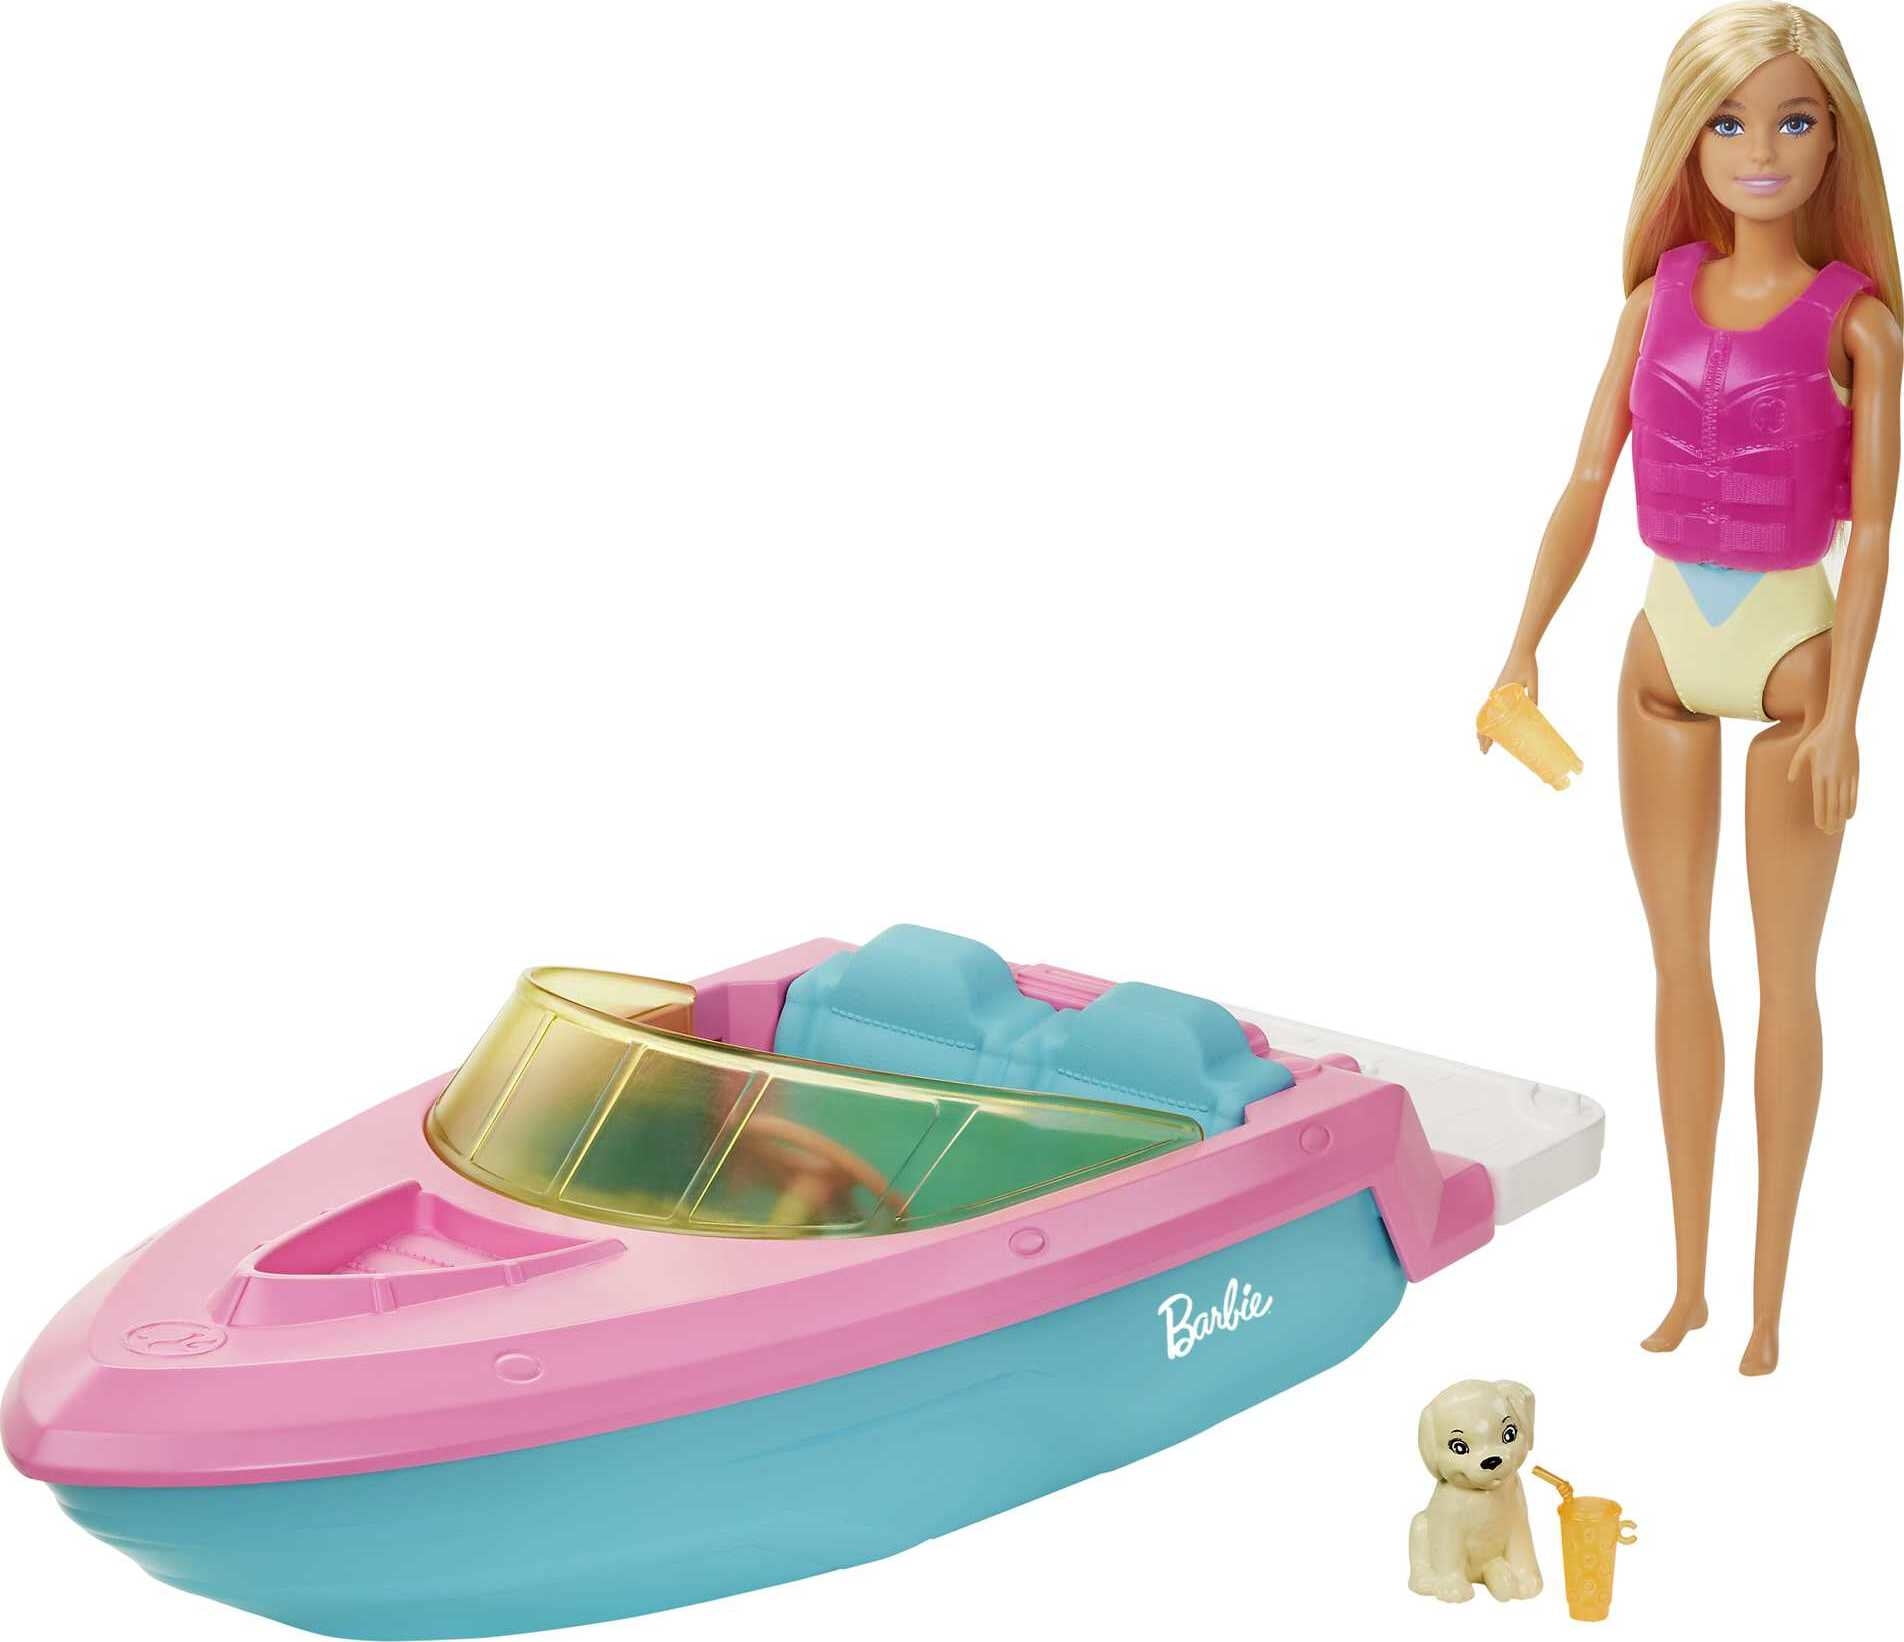 Barbie Accessories Free Shipping, Barbie Toys Free Shipping